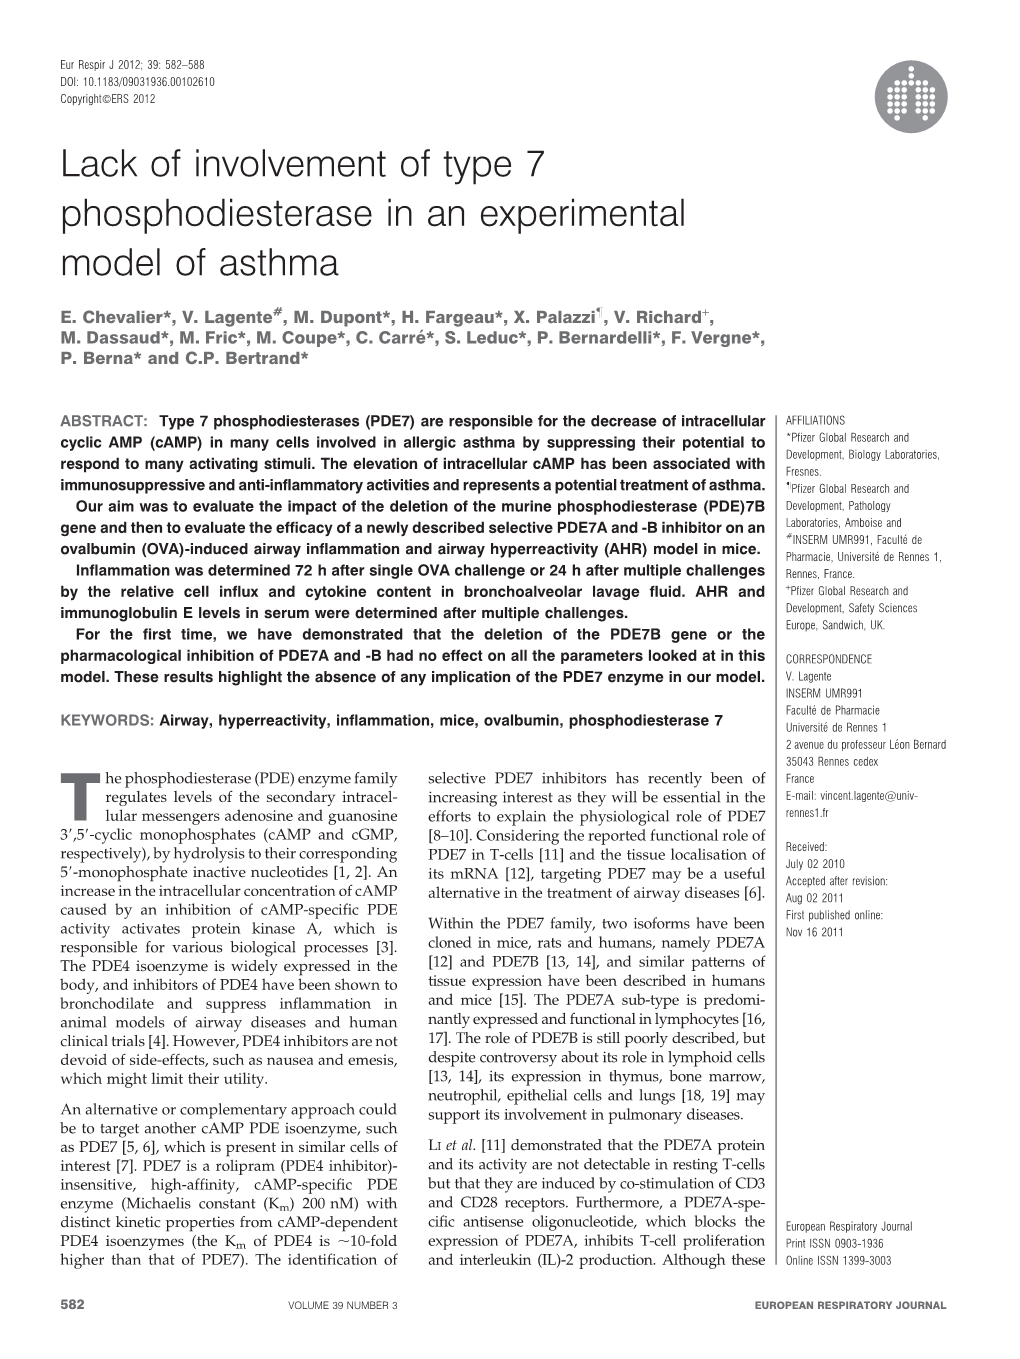 Lack of Involvement of Type 7 Phosphodiesterase in an Experimental Model of Asthma